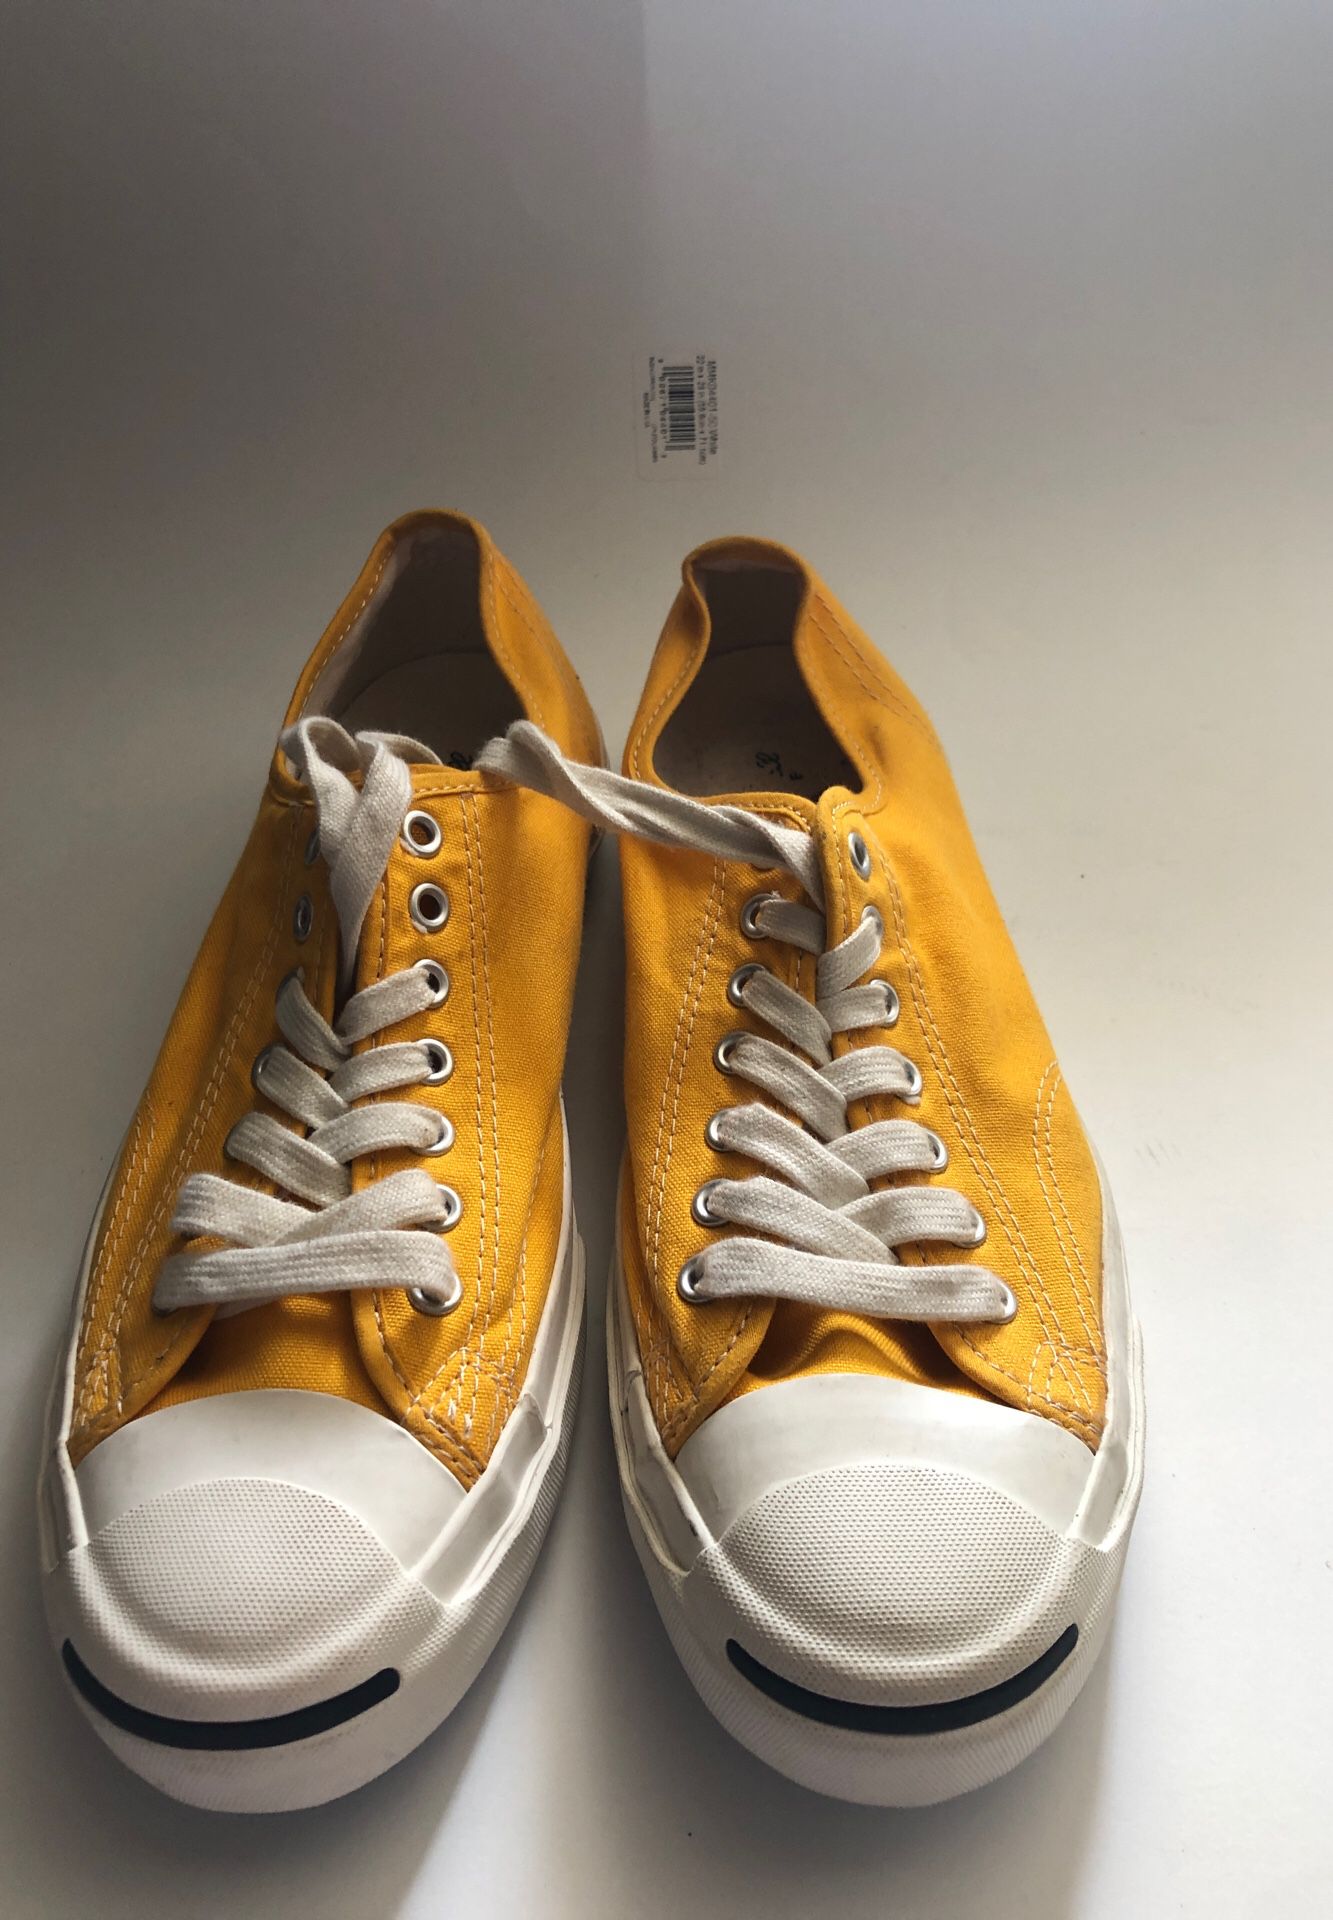 Yellow Jack Purcell Converses unisex’s